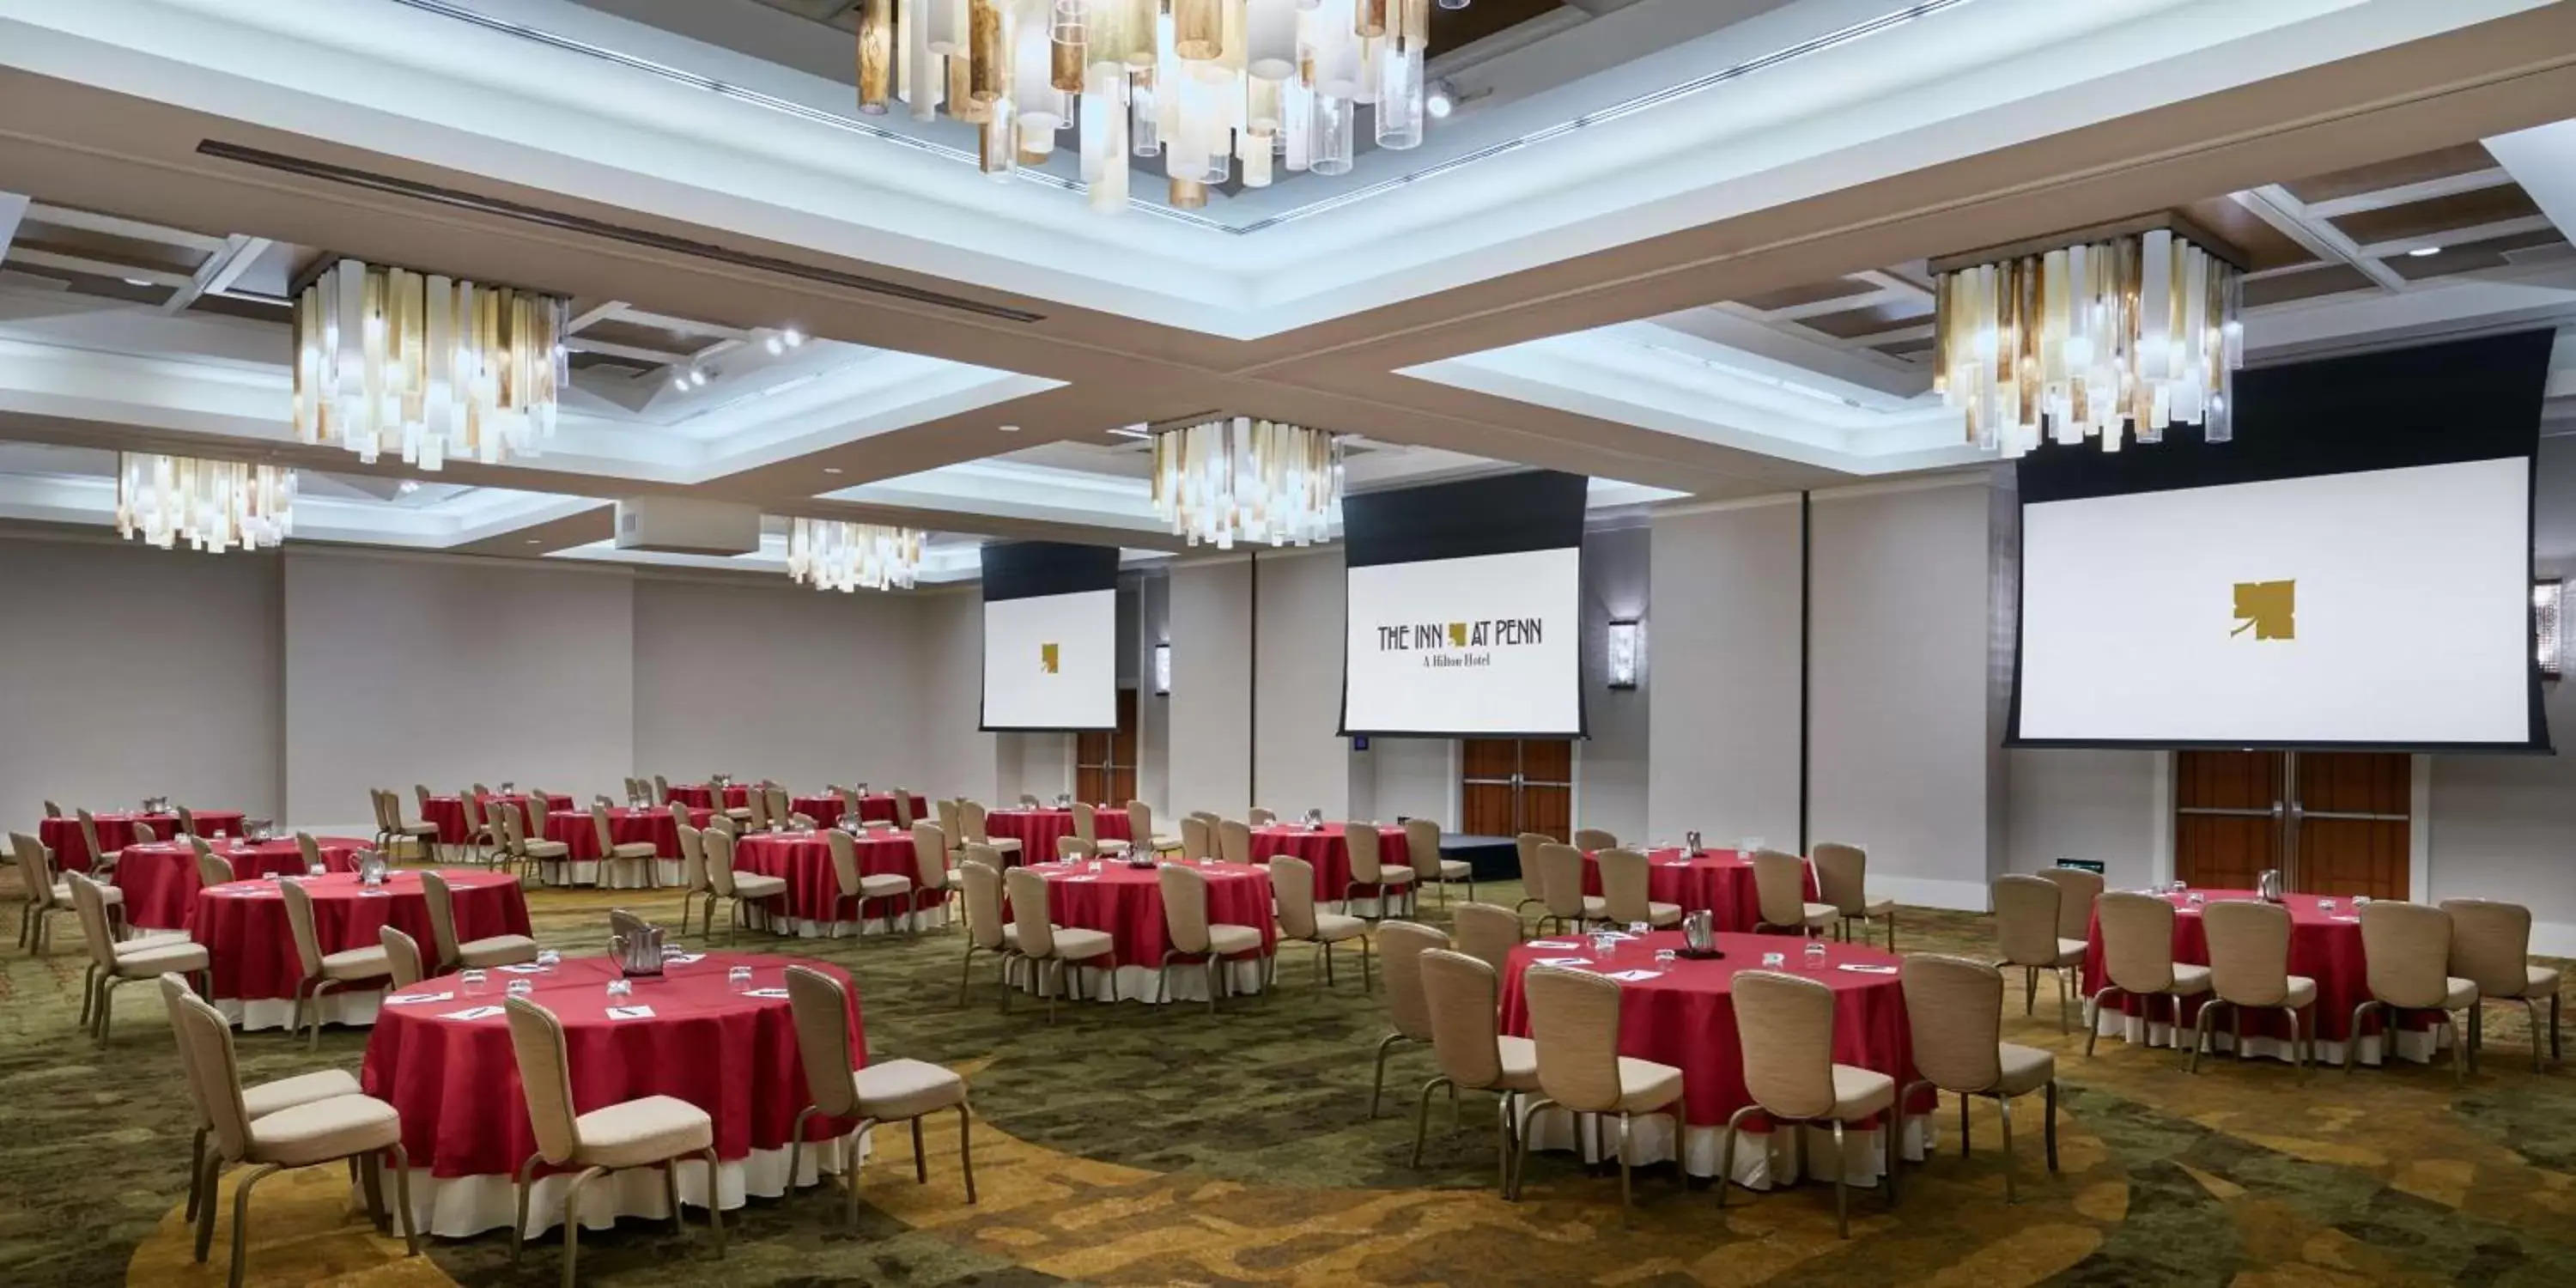 Meeting/conference room, Banquet Facilities in The Inn at Penn, A Hilton Hotel